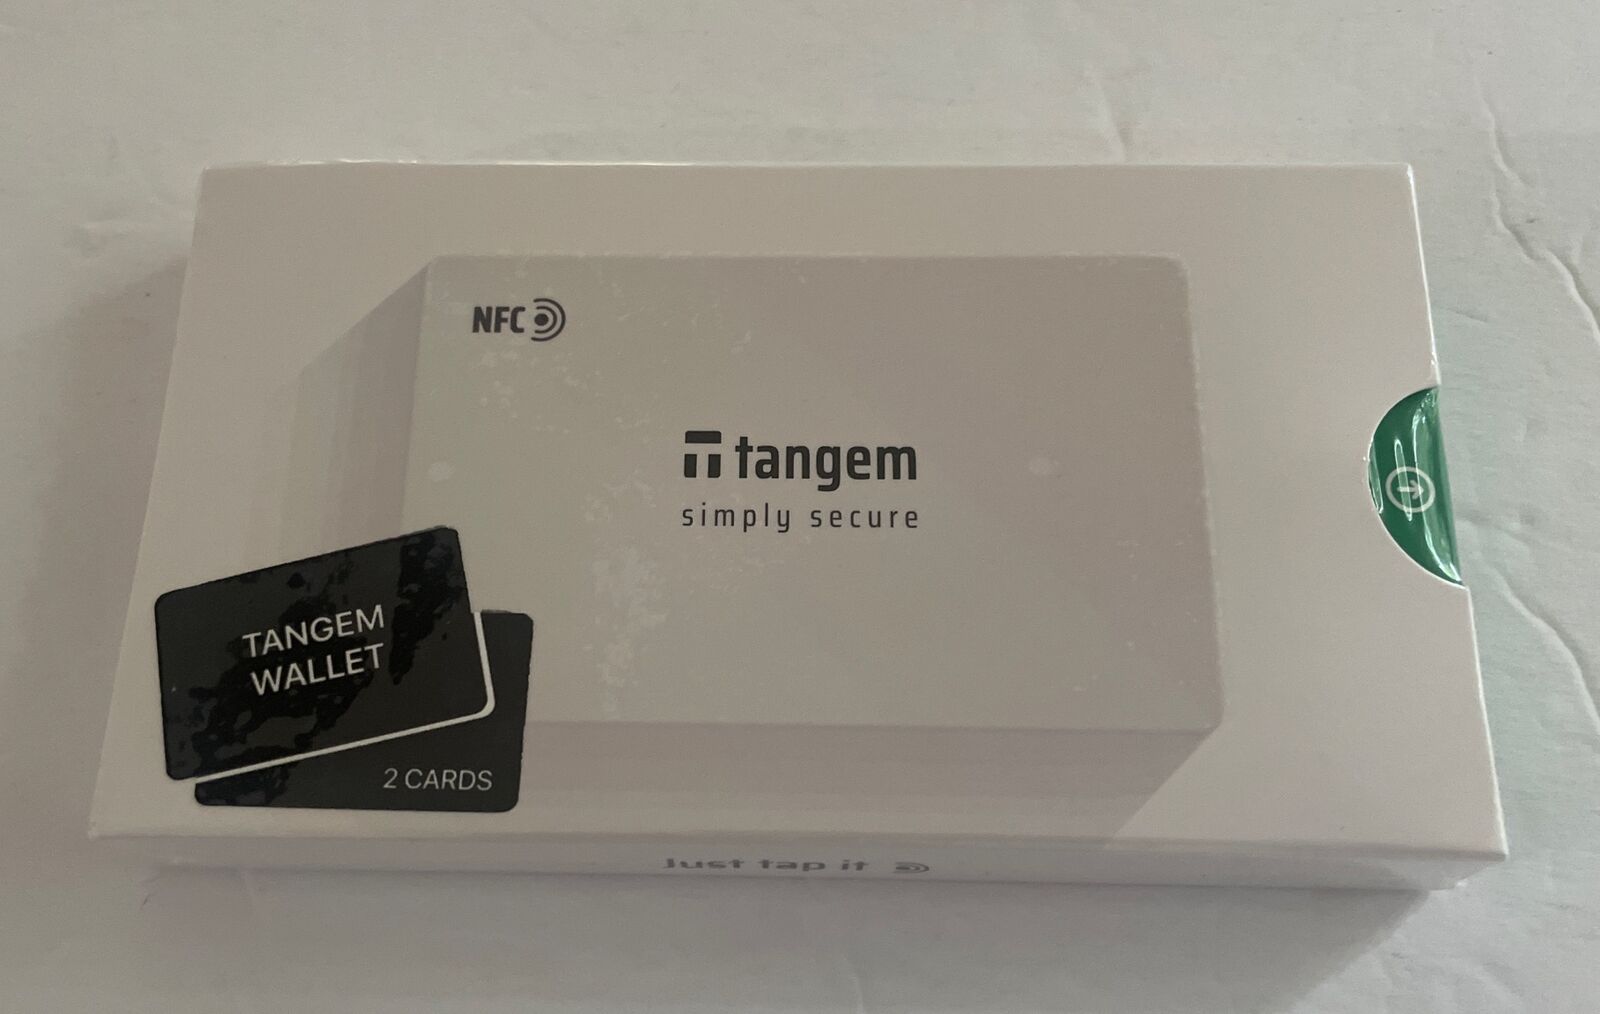 Tangem multicurrency hardware wallet Secure crypto storage 2 Card wallet. NEW